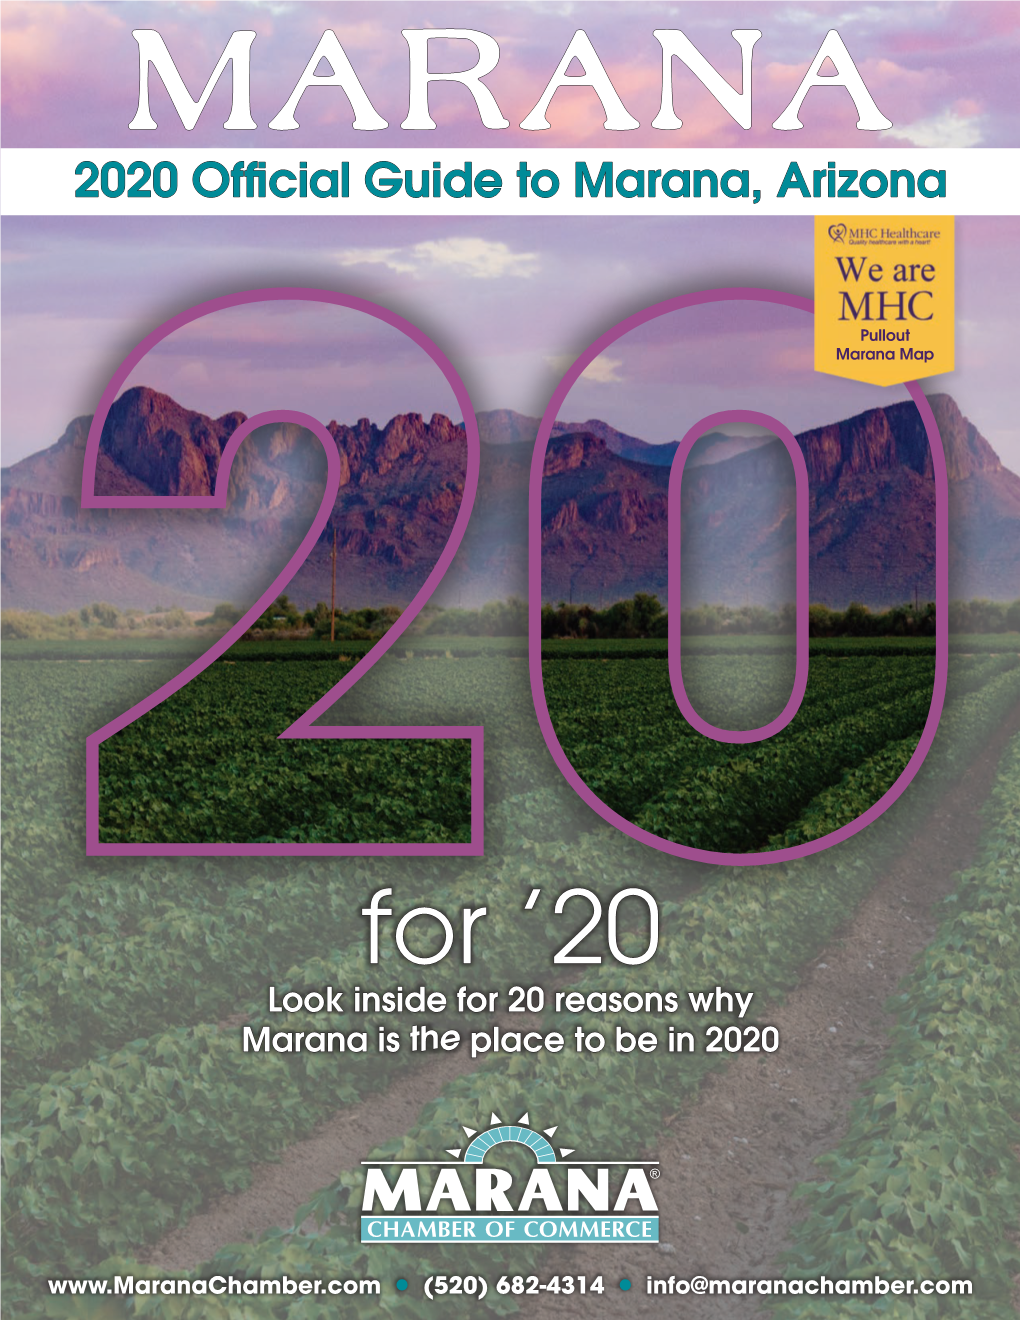 For ’20 Look Inside for 20 Reasons Why Marana Is the Place to Be in 2020